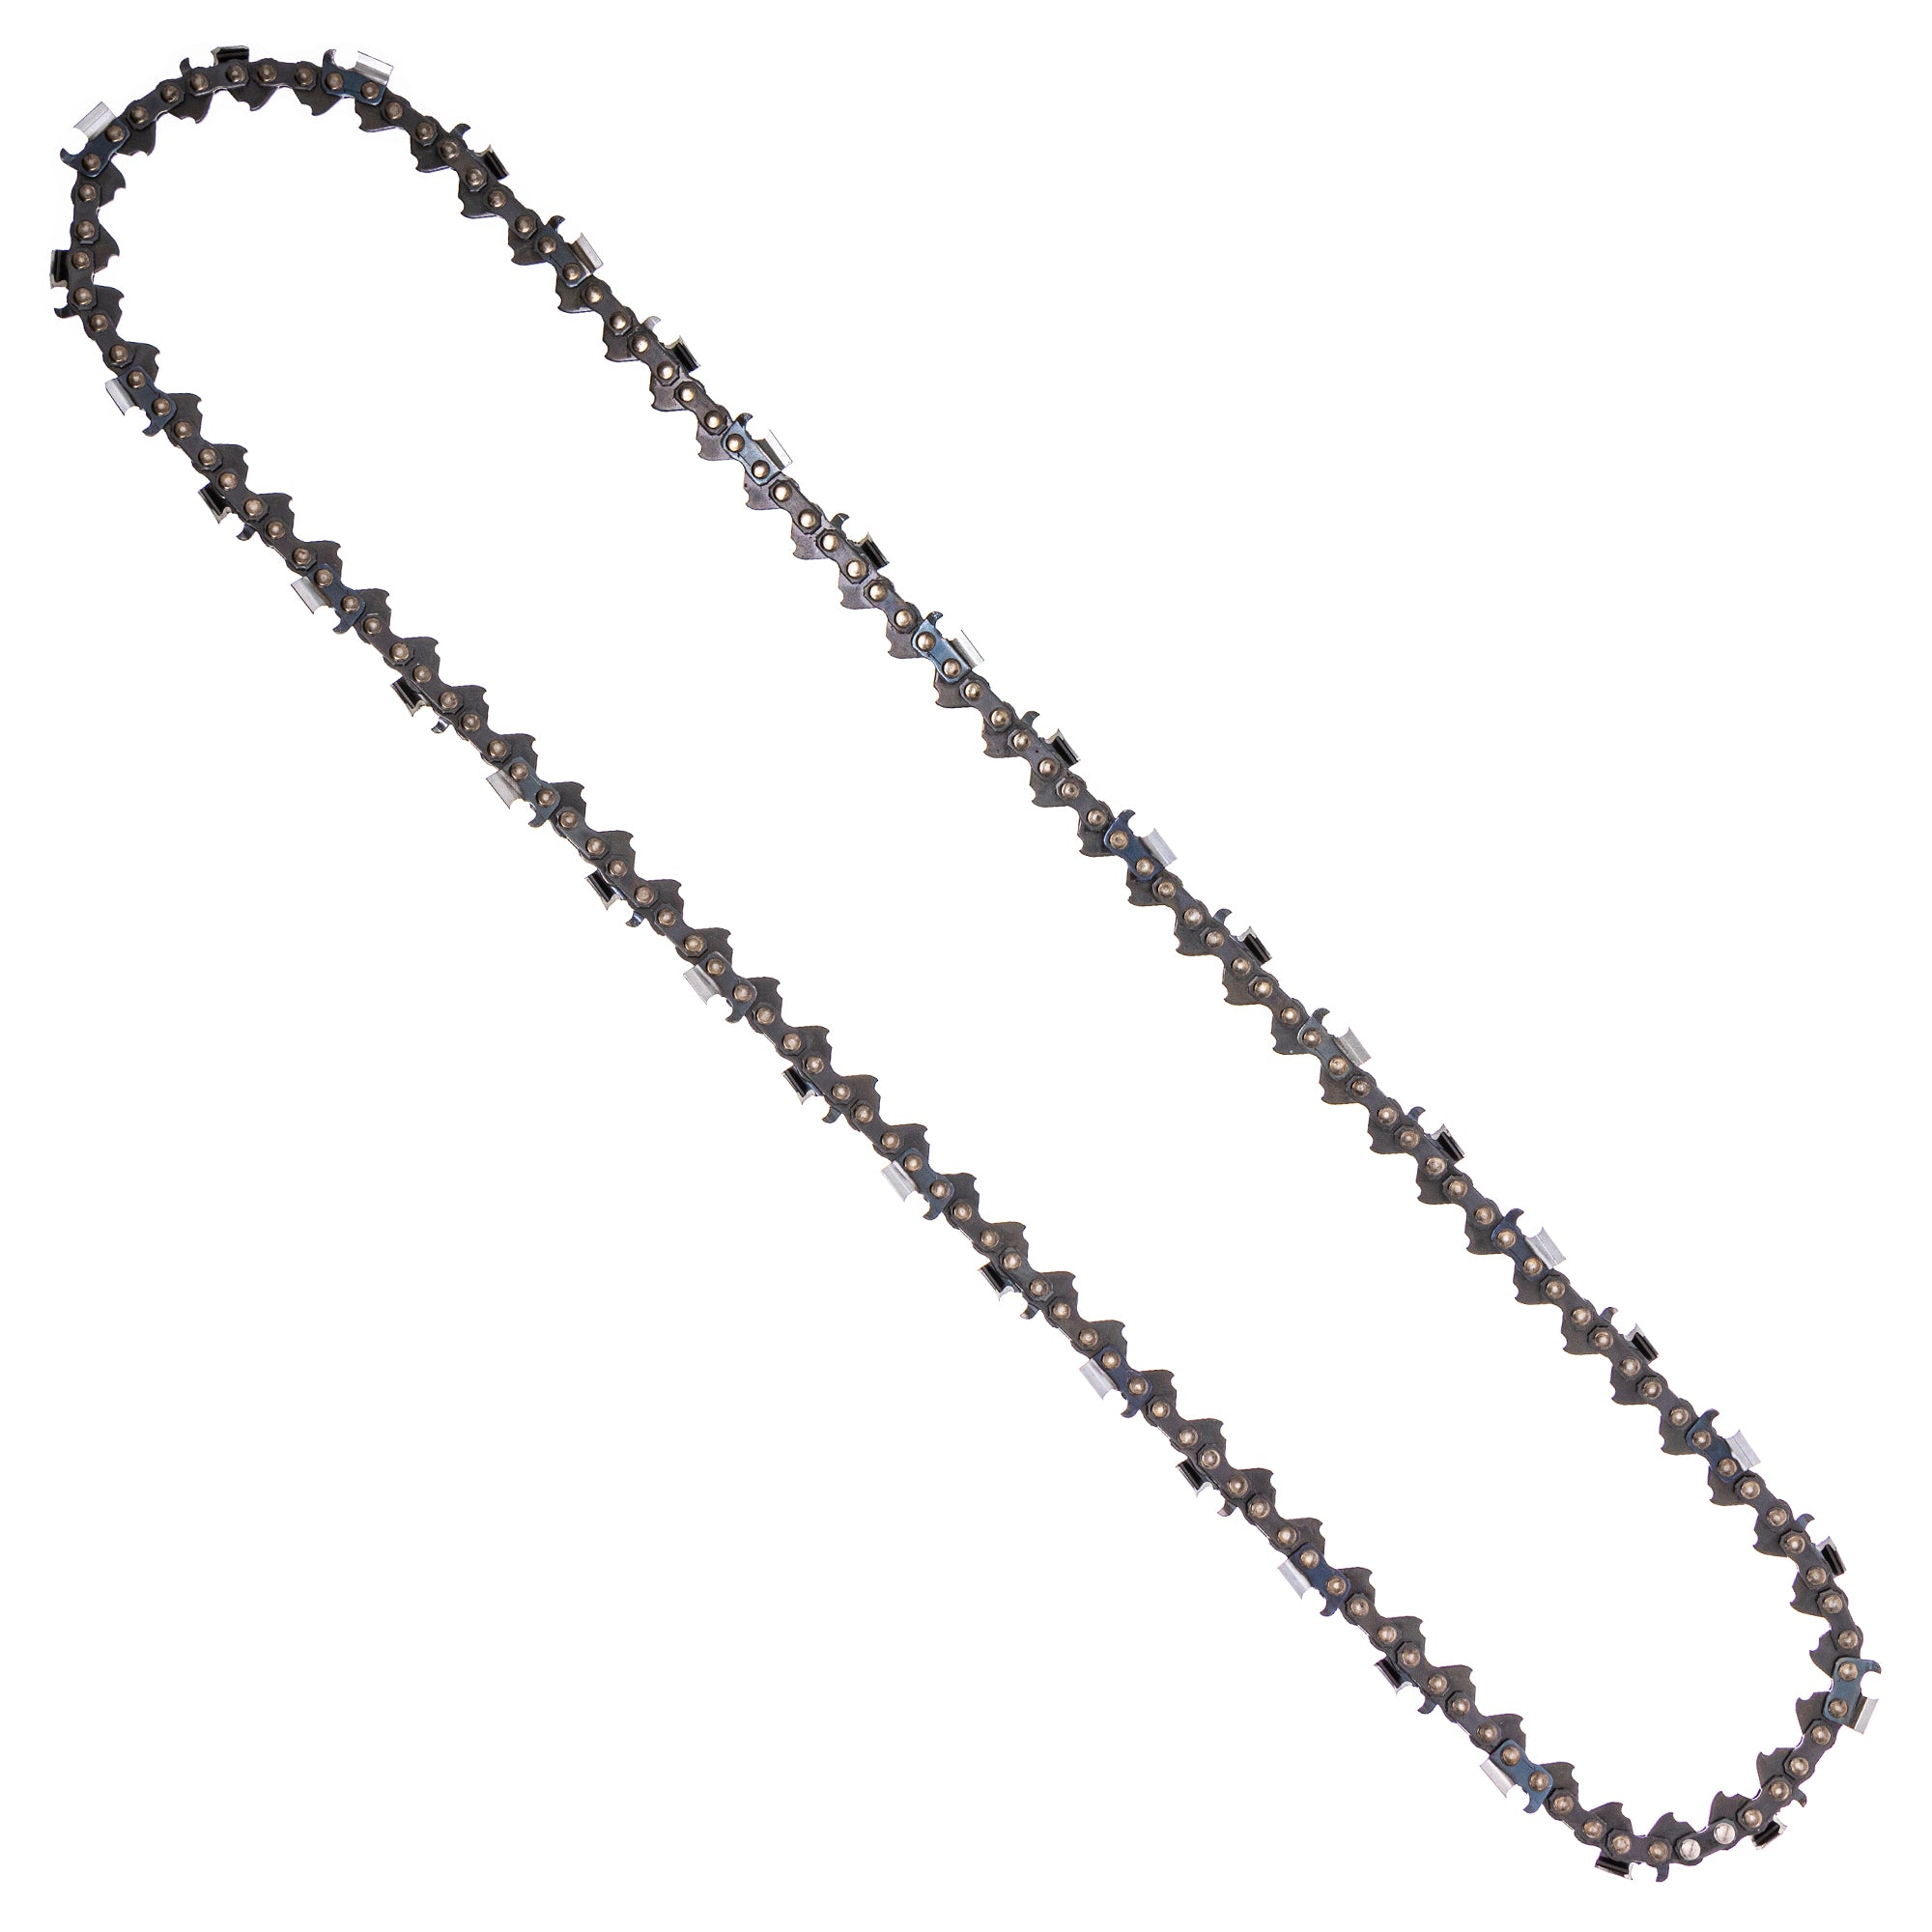 8TEN 810-CCC2230H Chain 2-Pack for zOTHER Stens Oregon Husqvarna